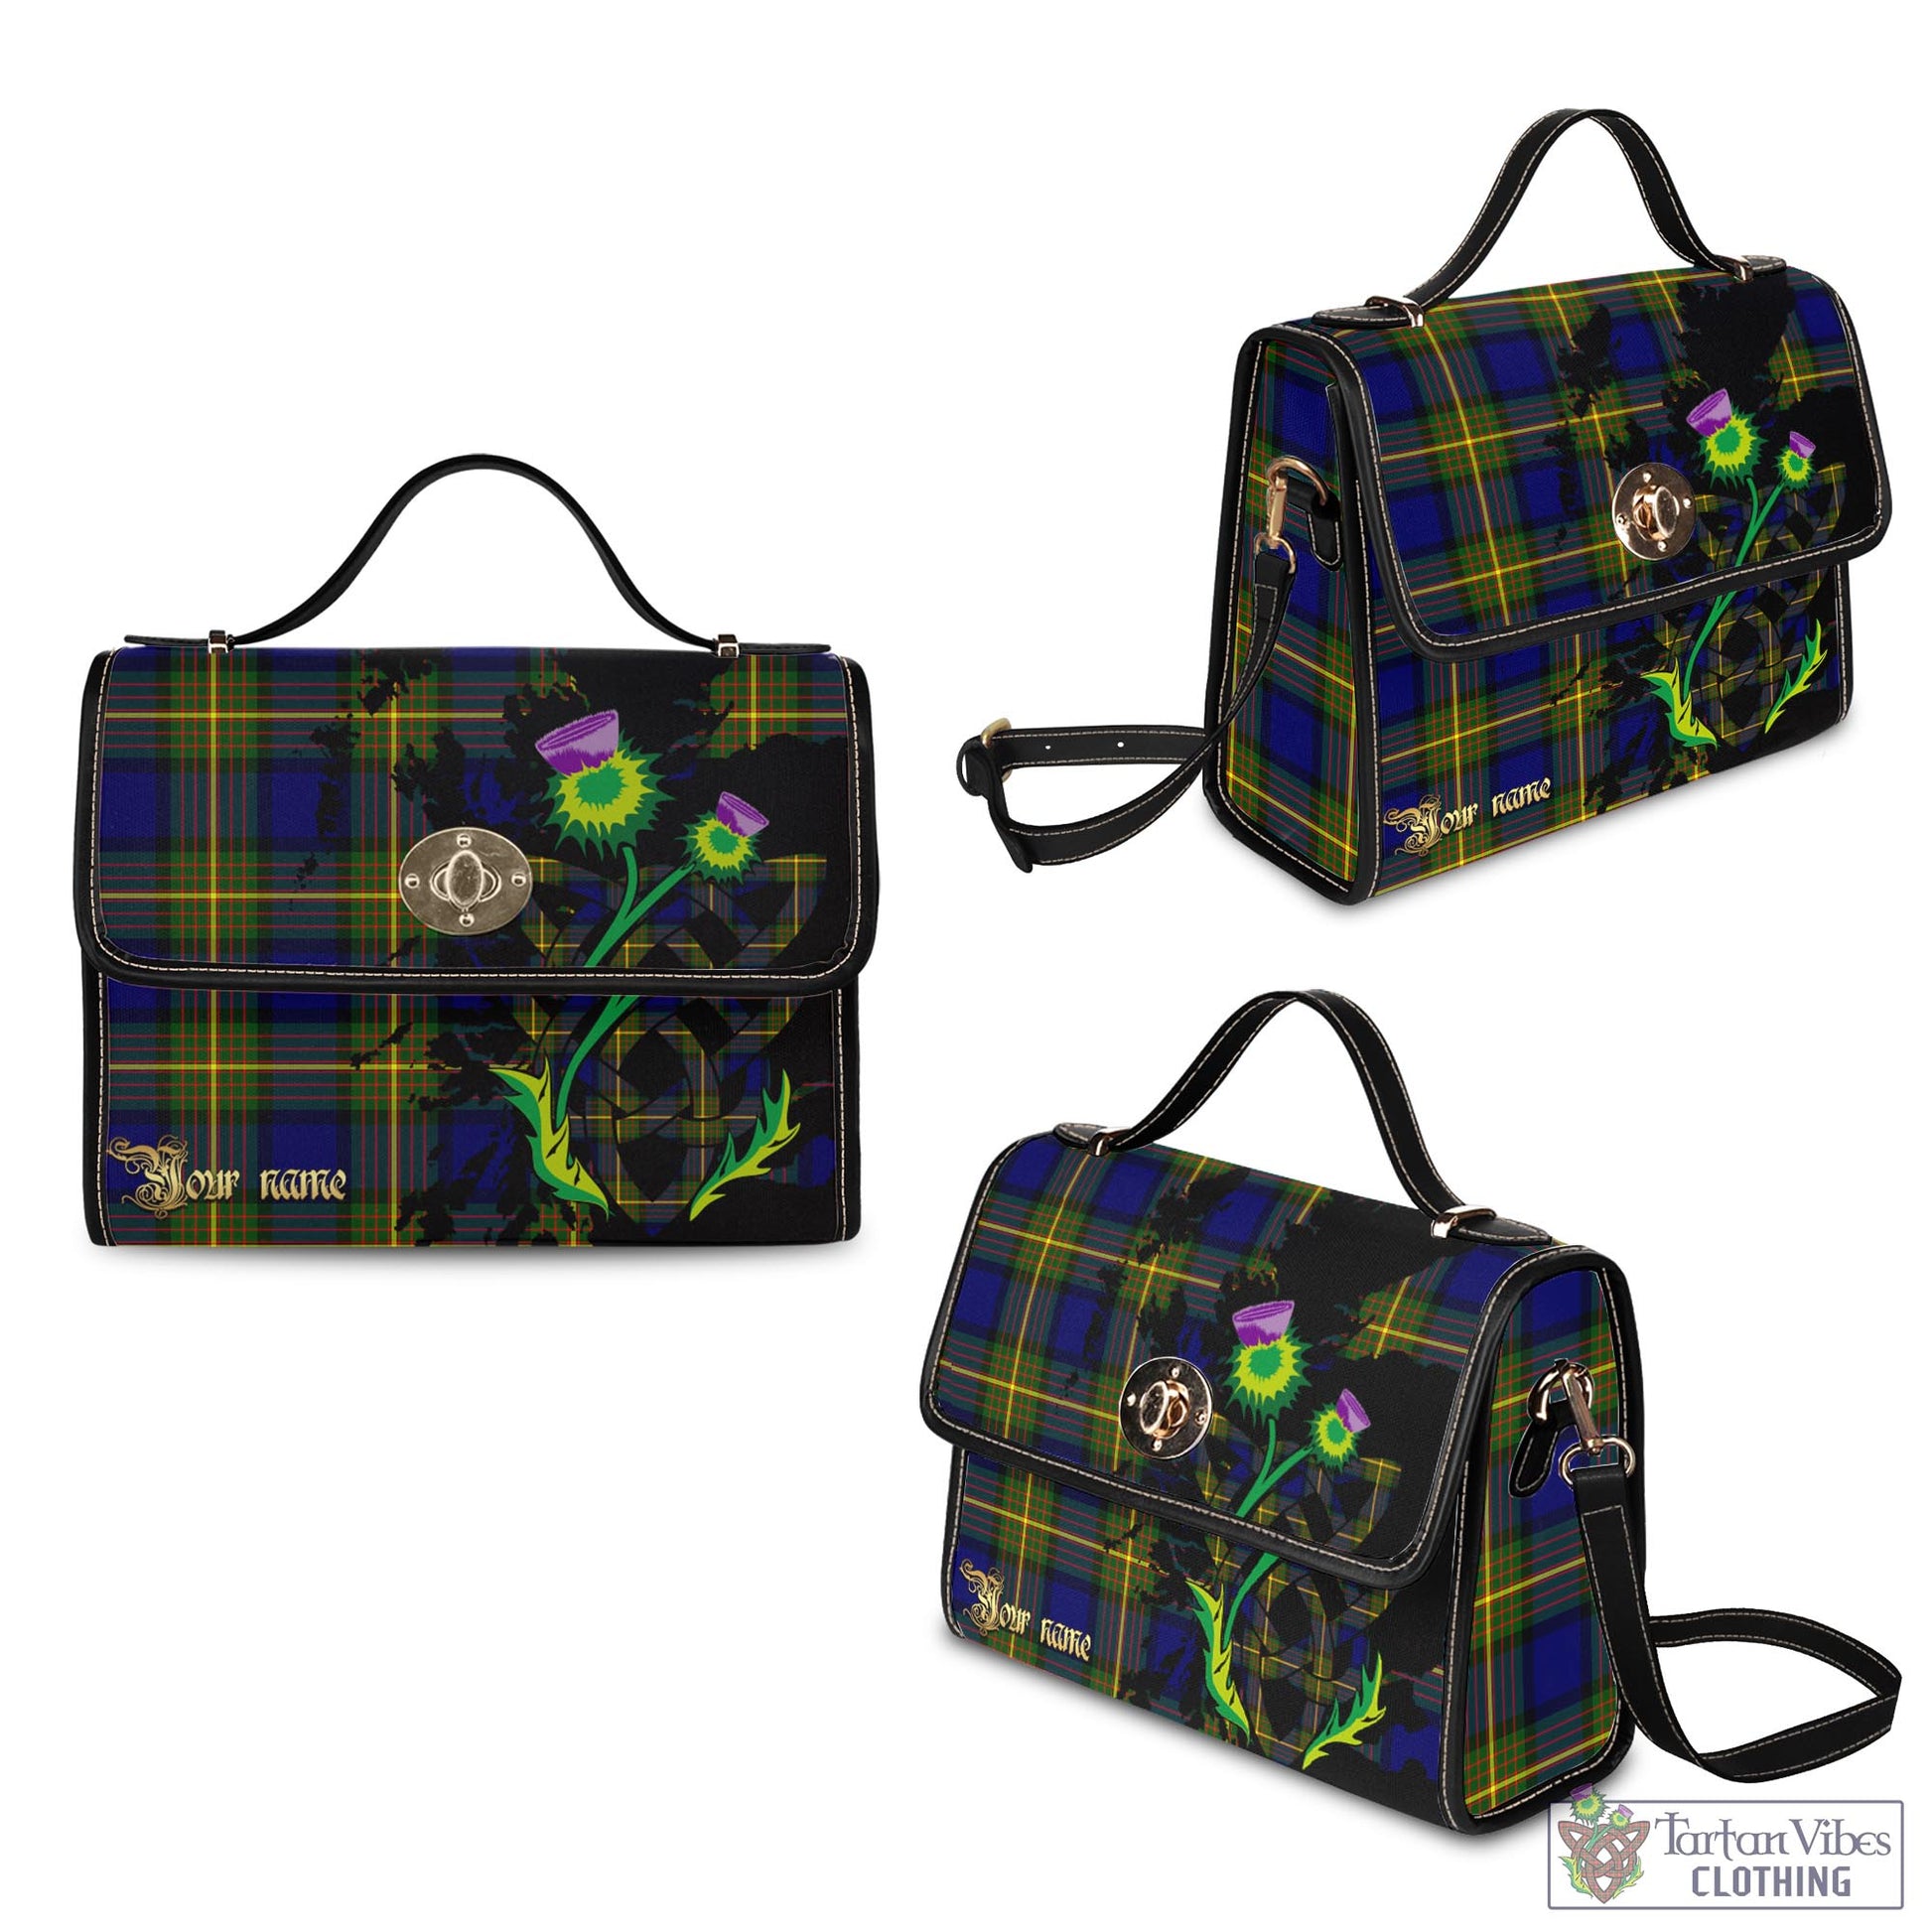 Tartan Vibes Clothing Moore Tartan Waterproof Canvas Bag with Scotland Map and Thistle Celtic Accents